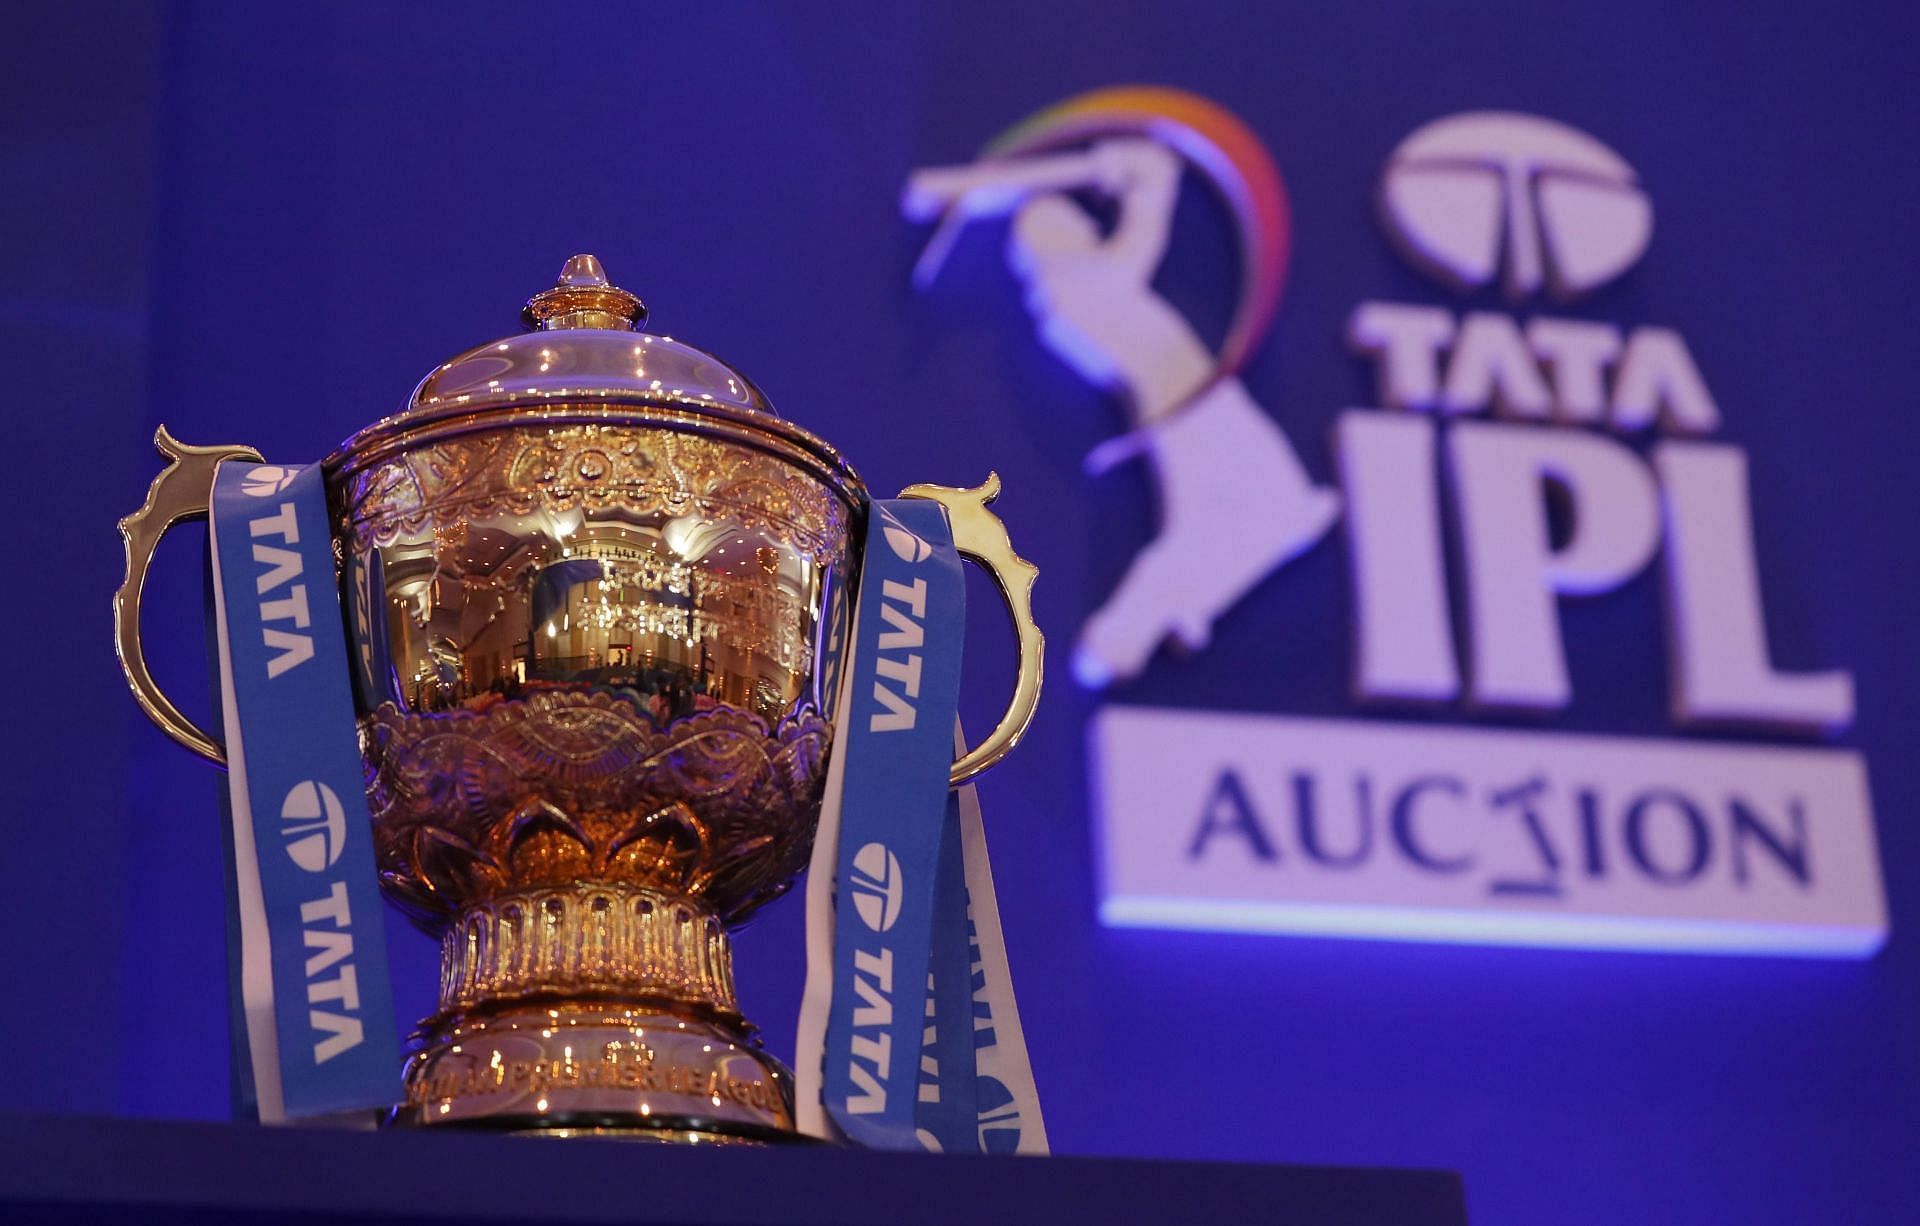 IPL media rights for 2023-207 have been sold